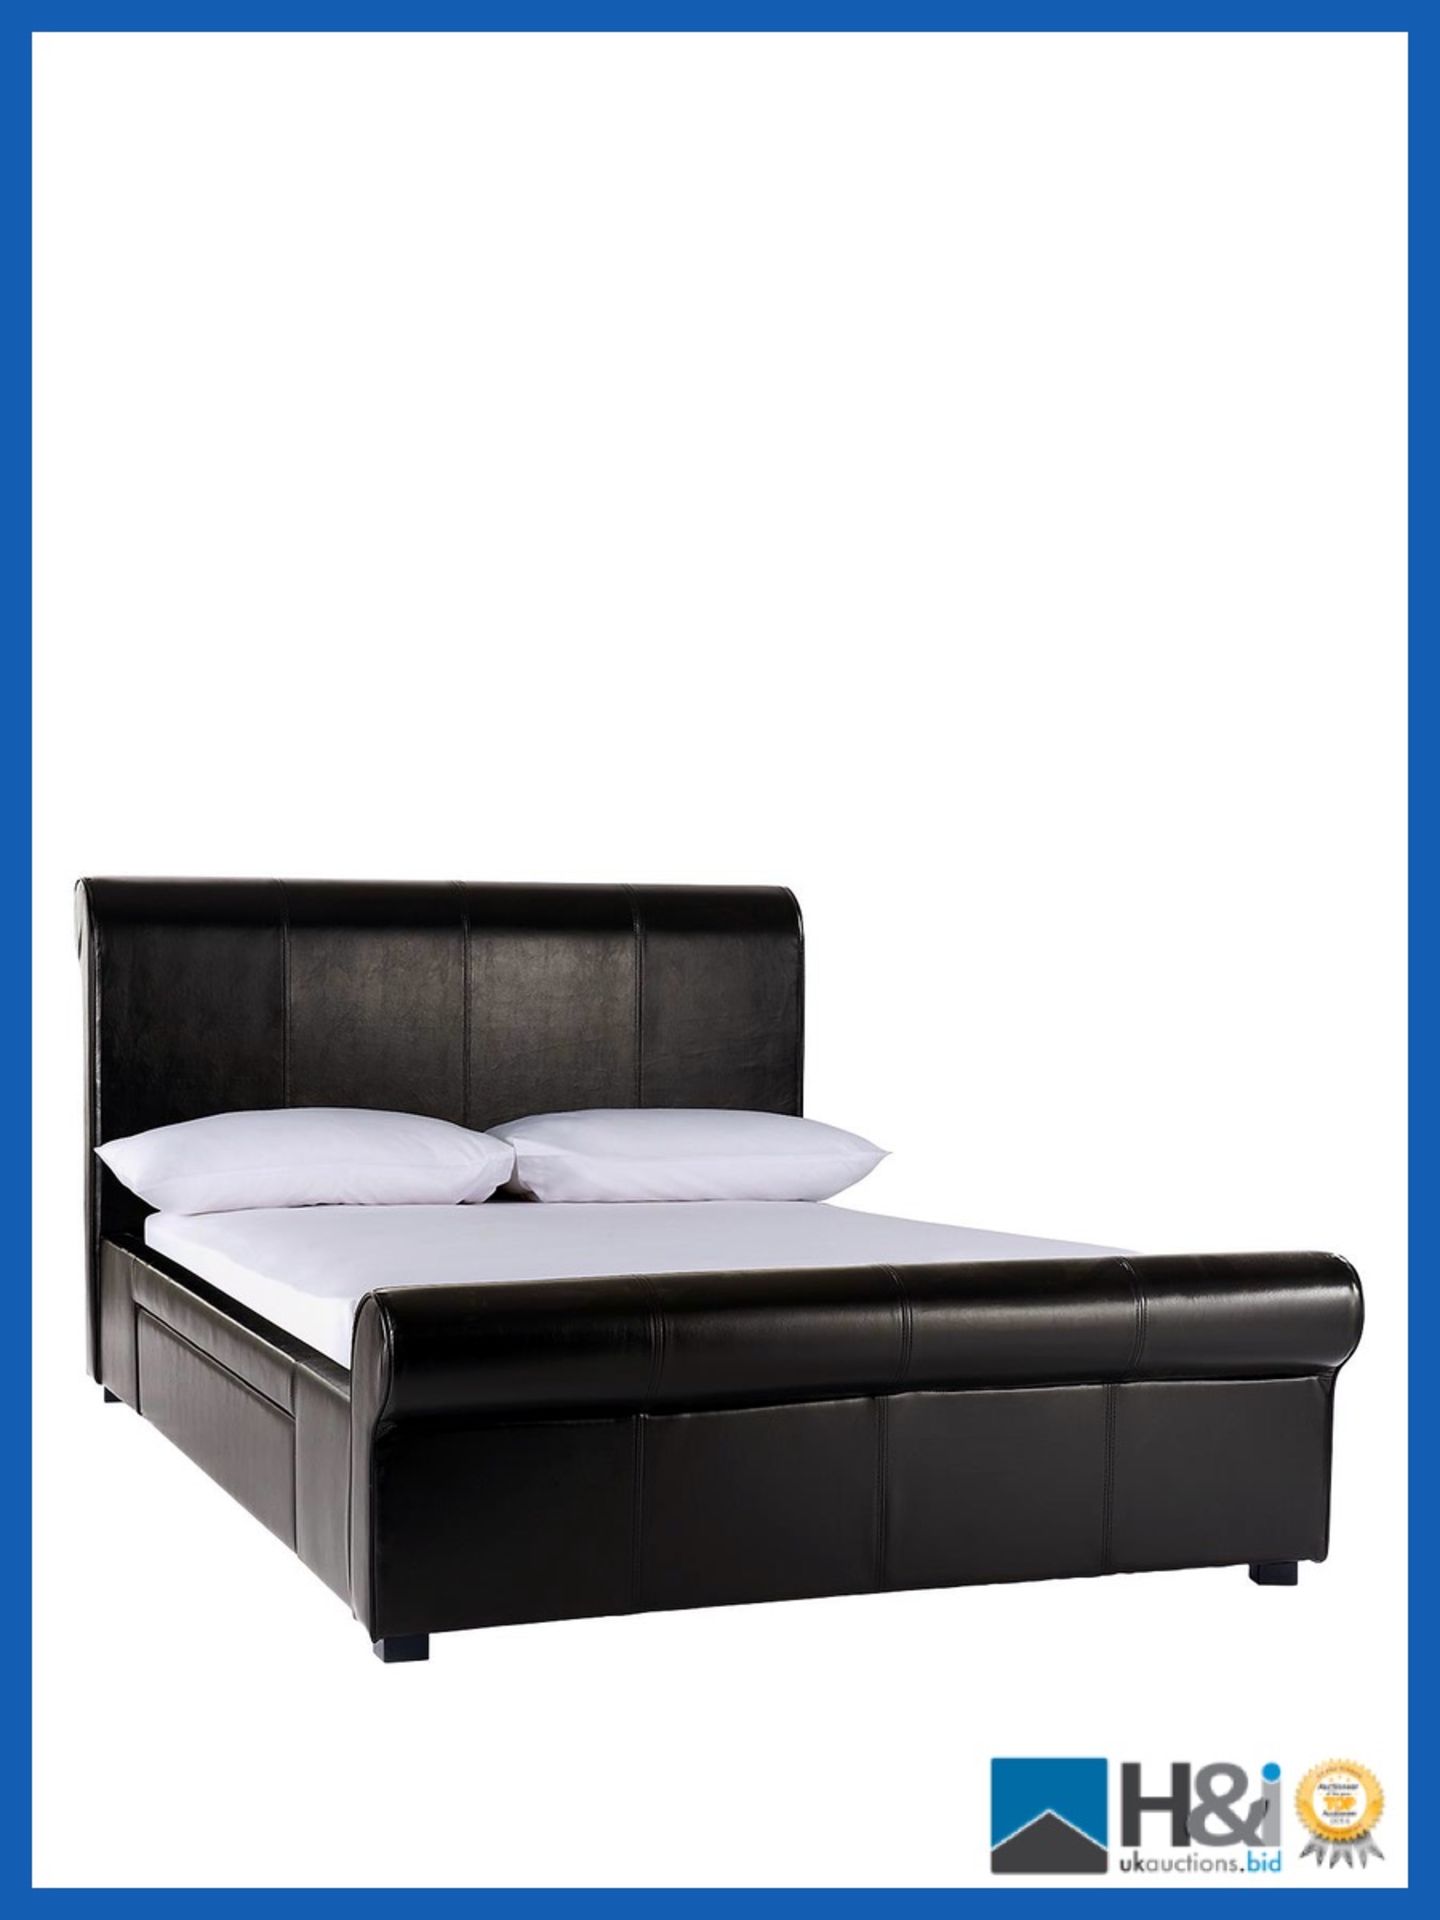 BOXED GRADE *A* ITEM MADRID DOUBLE STORAGE BED [BLACK] 107x153x233CM RRP:GBP 622.0